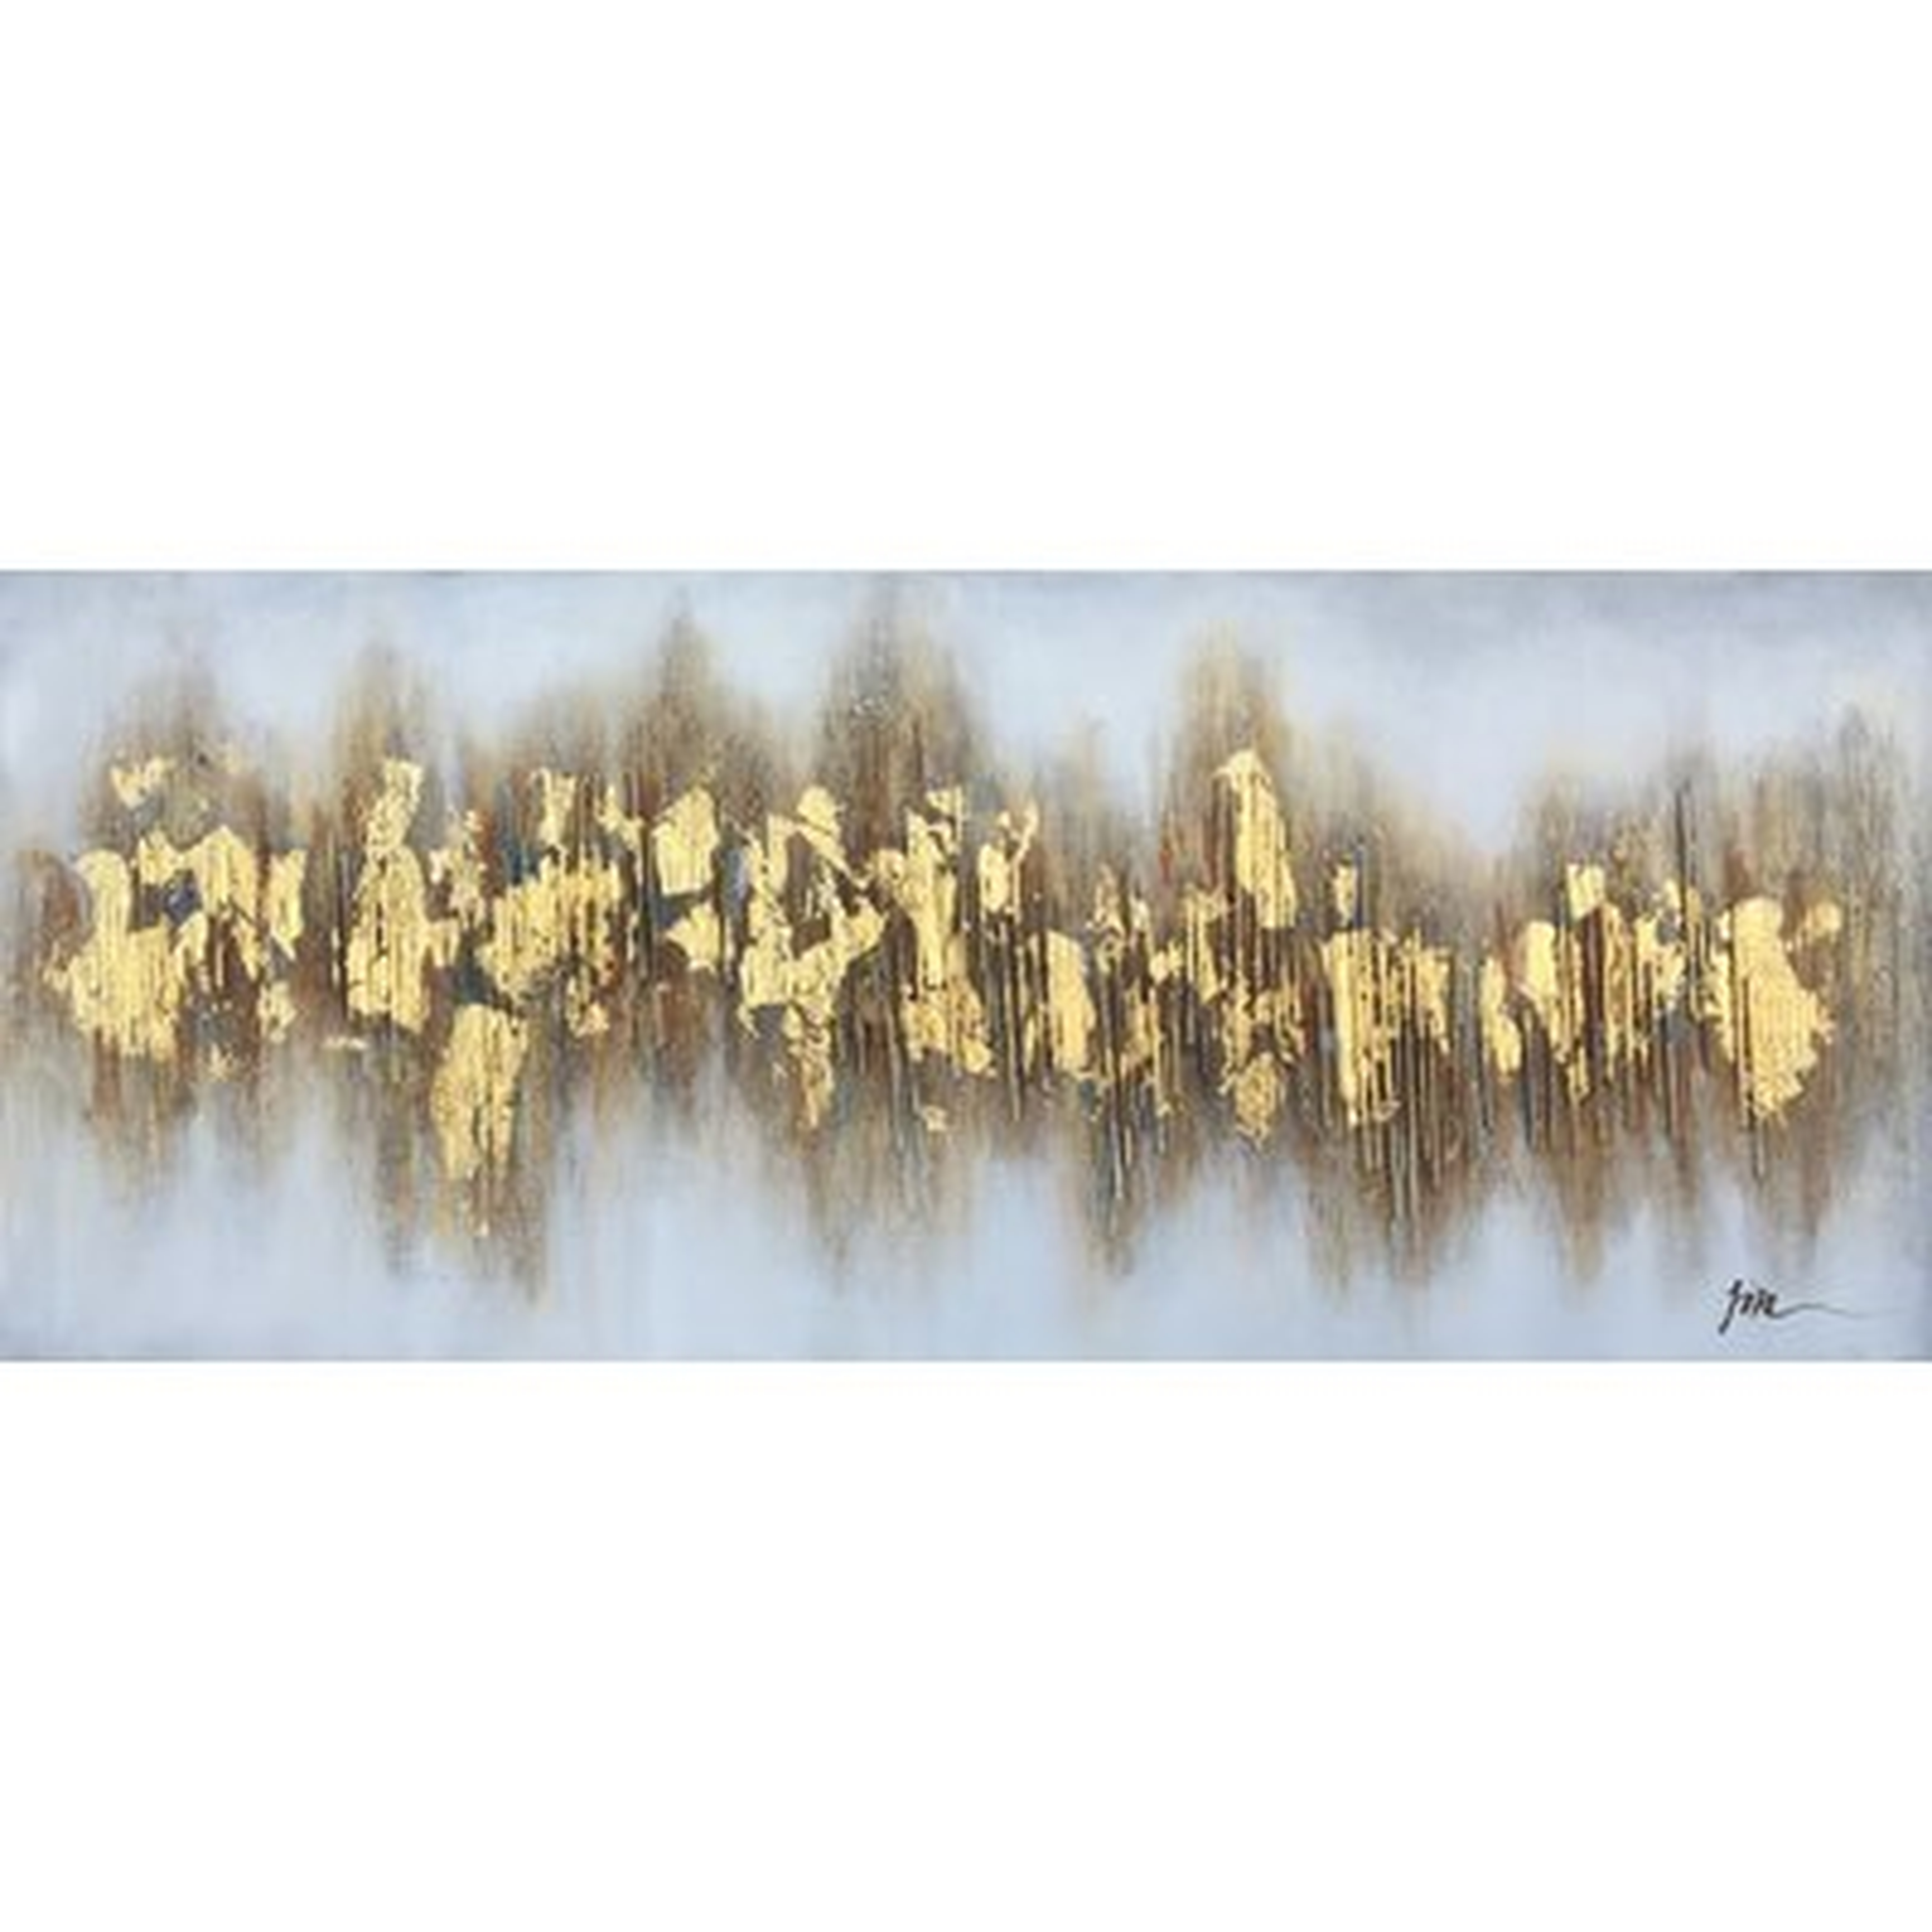 Beaming Gold Flakes' Oil Painting Print on Wrapped Canvas - Wayfair